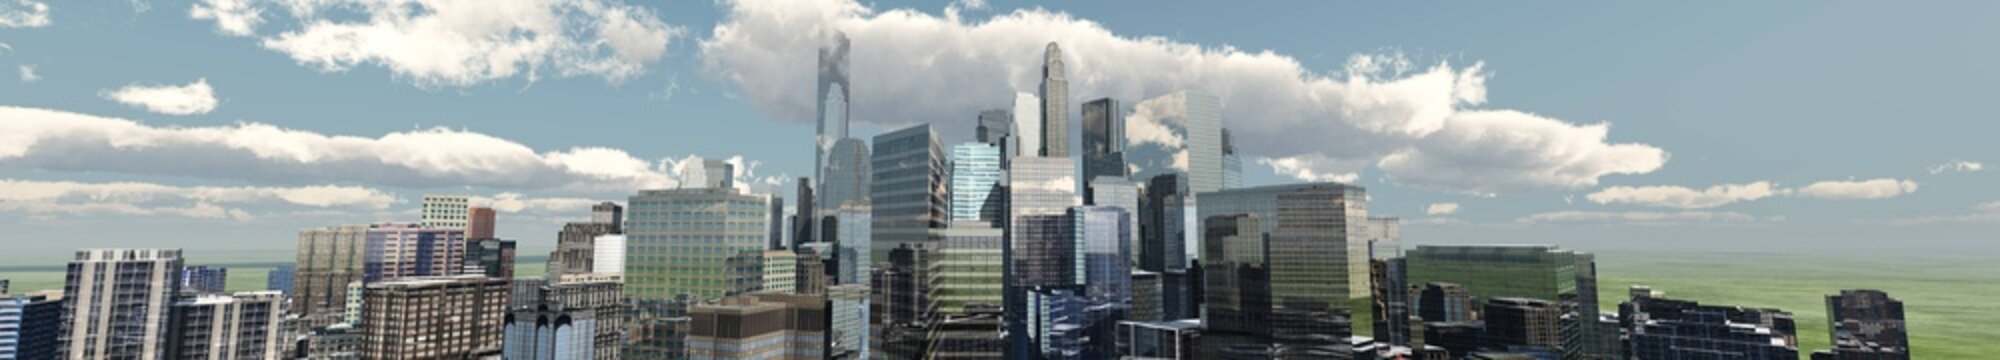 panorama of the city against the sky with clouds,
3D rendering